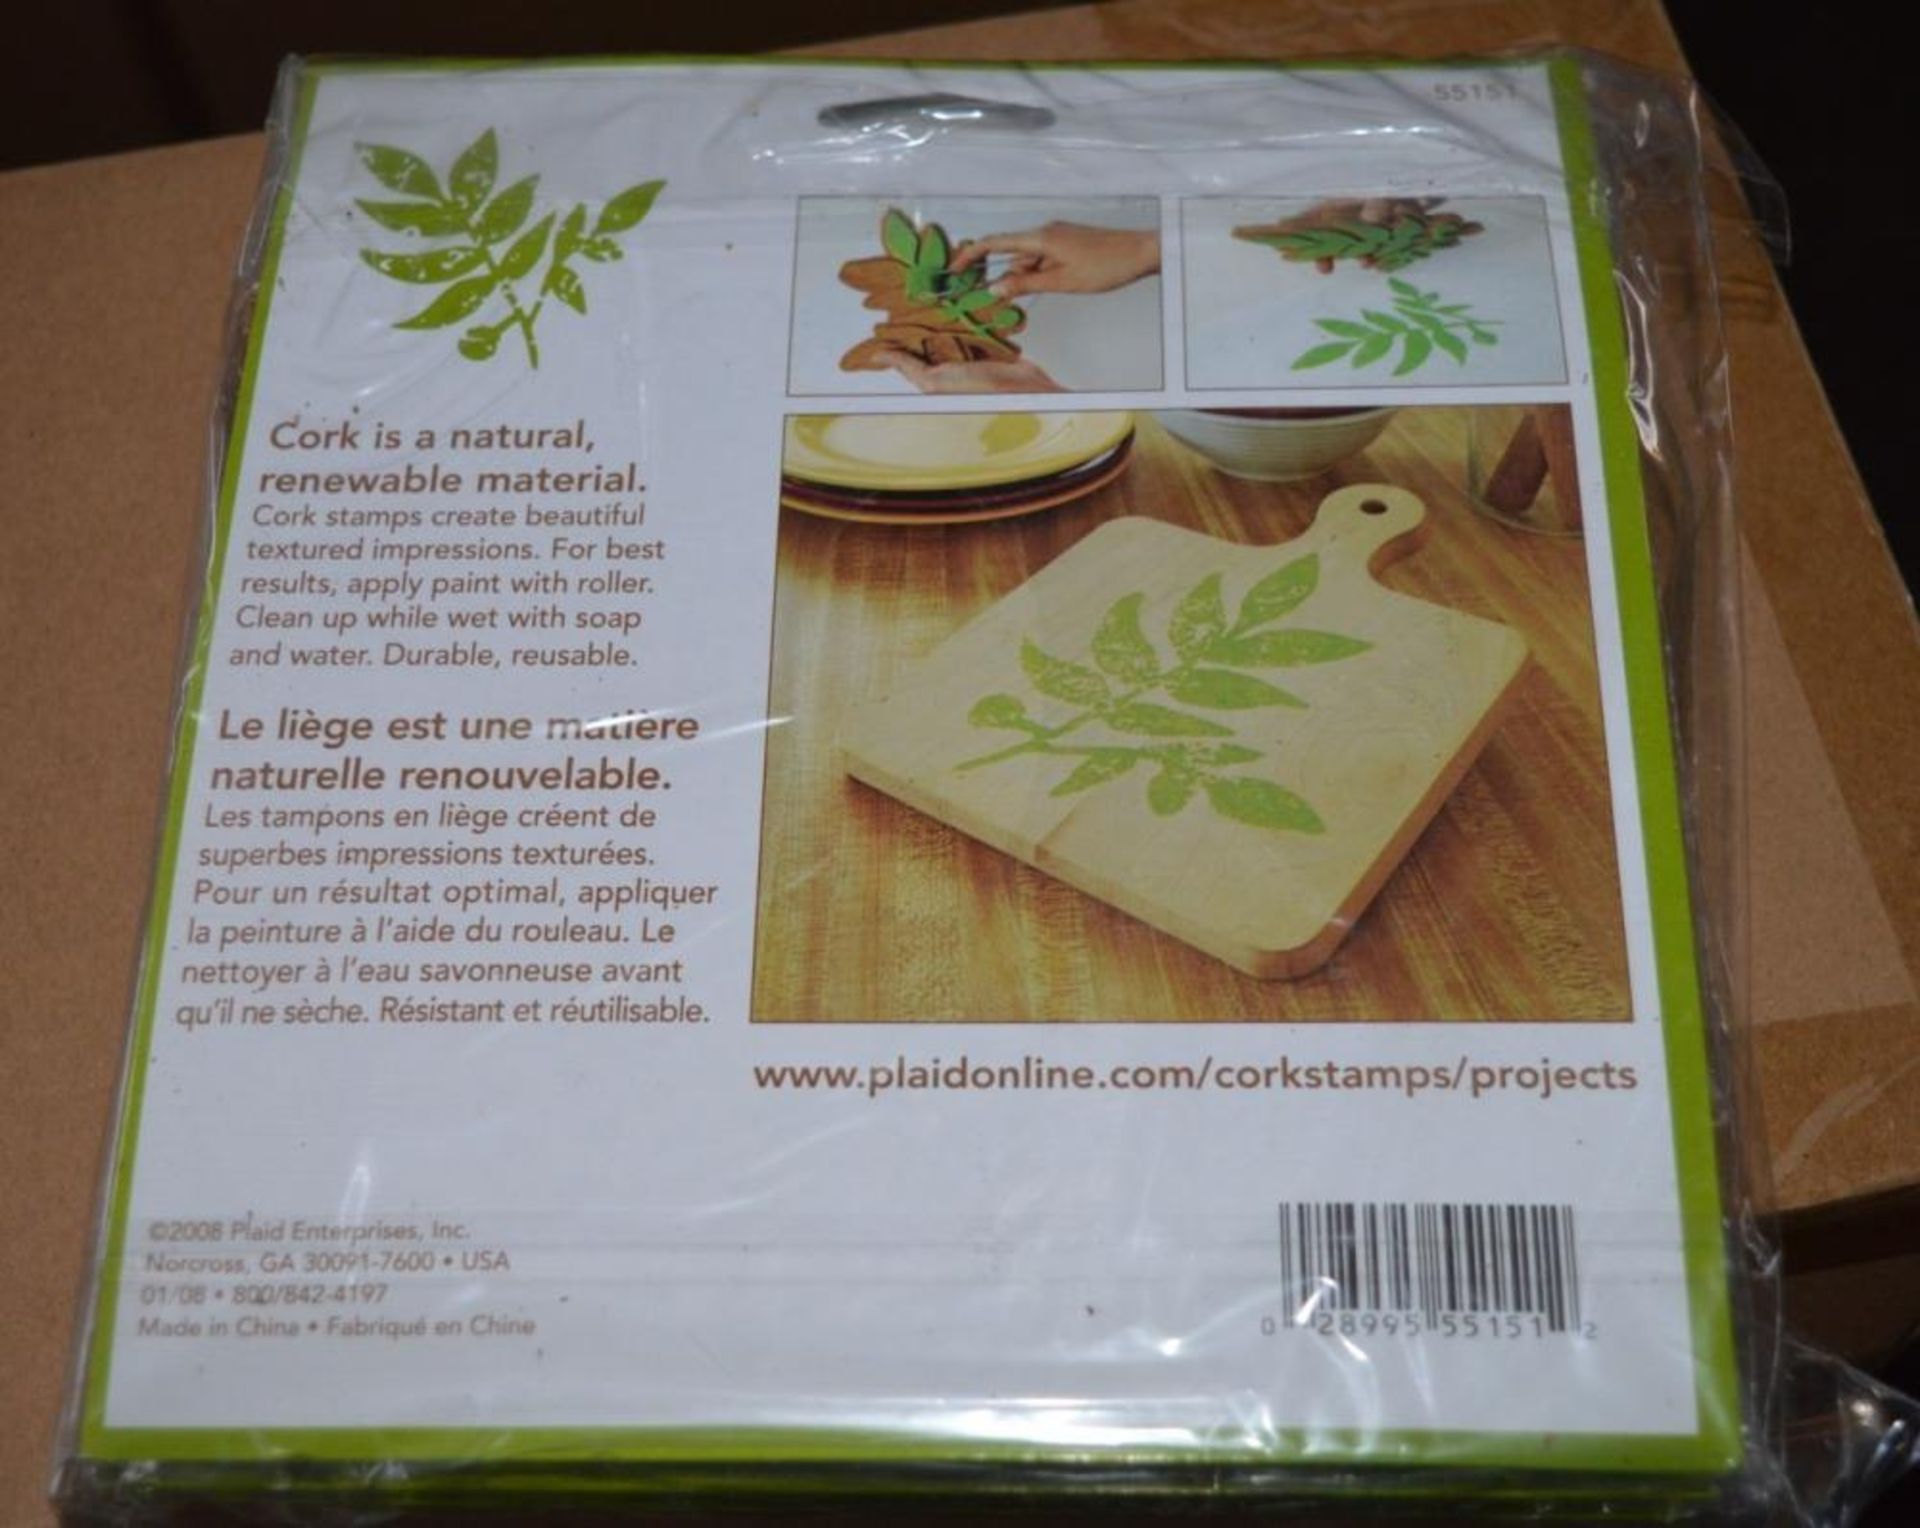 24 x Plaid Cork Stamp Leaf Cluster Packs - Includes 1 Box of 24 - Natural Cork - Approx Size of Each - Image 2 of 2